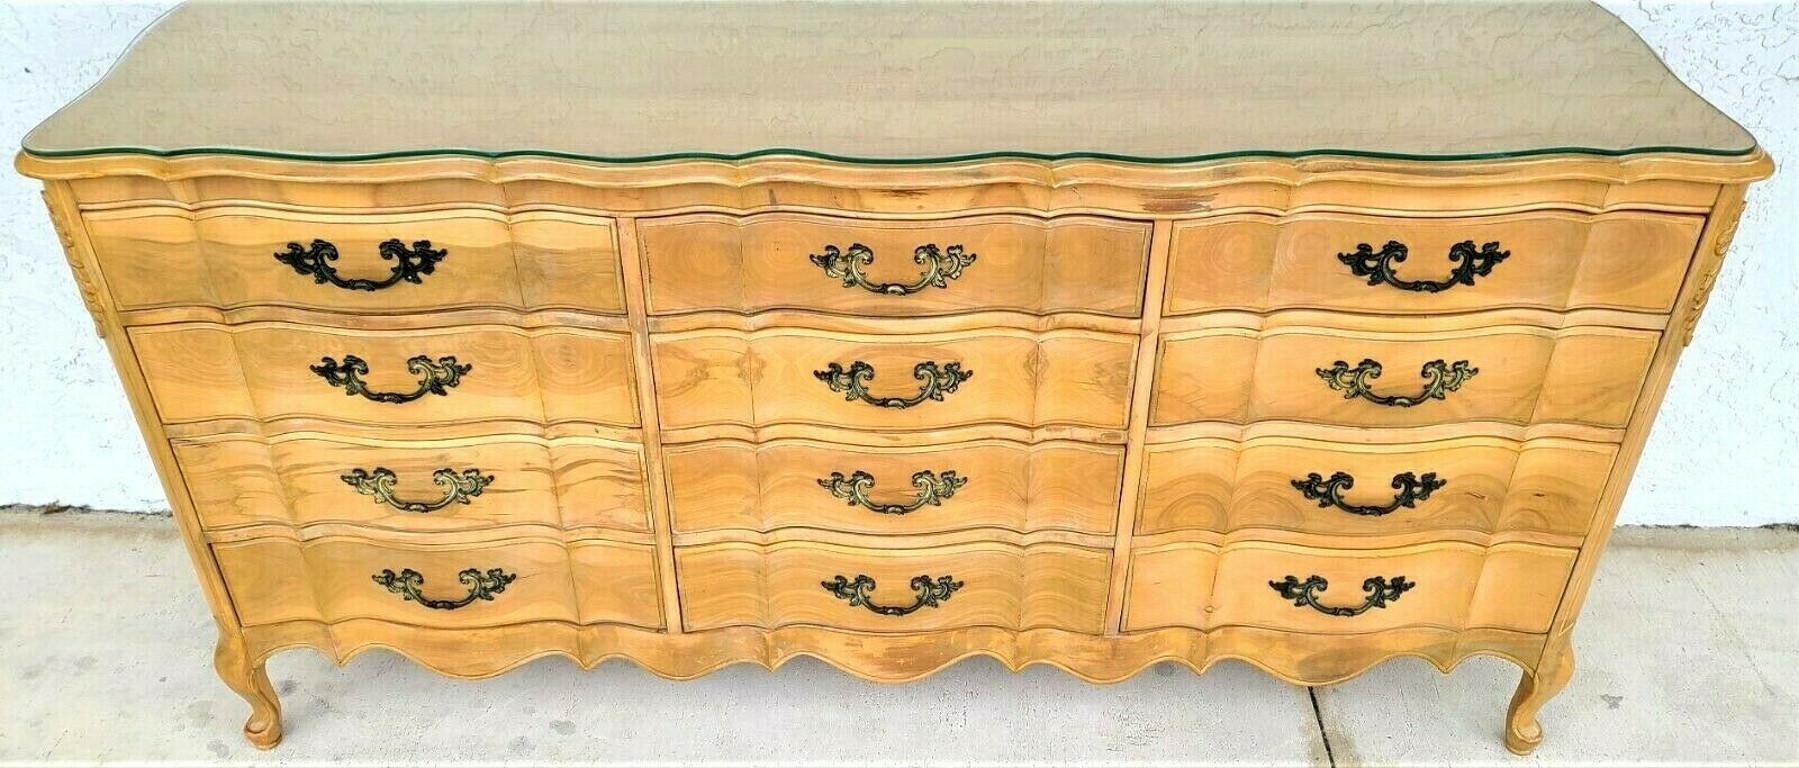 Classic vintage olive burl light wood French Provincial Louis XV style sculpted glass top 12 drawer dresser 
Made of solid wood with 12 drawers and custom cut glass top. 

Approximate measurements in inches
35.5